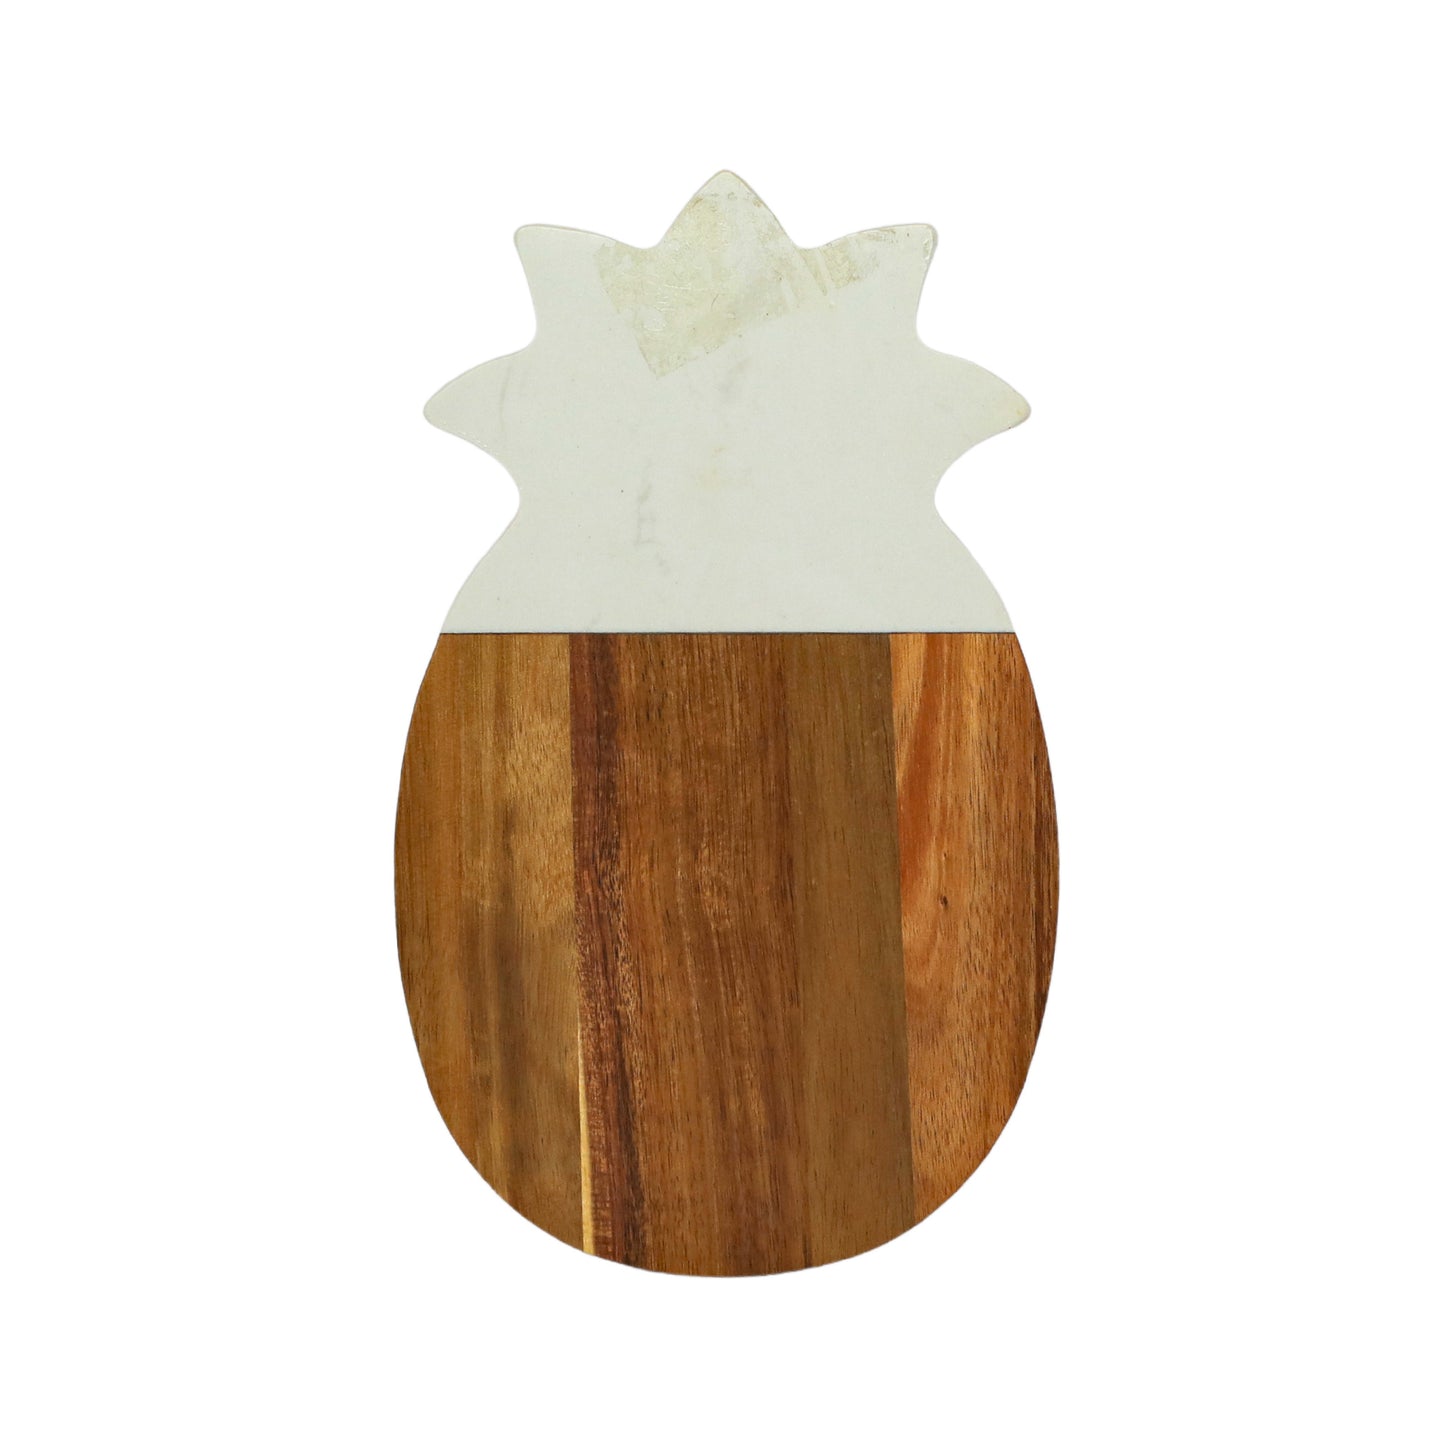 White Marble and Acacia Wood Pineapple Board